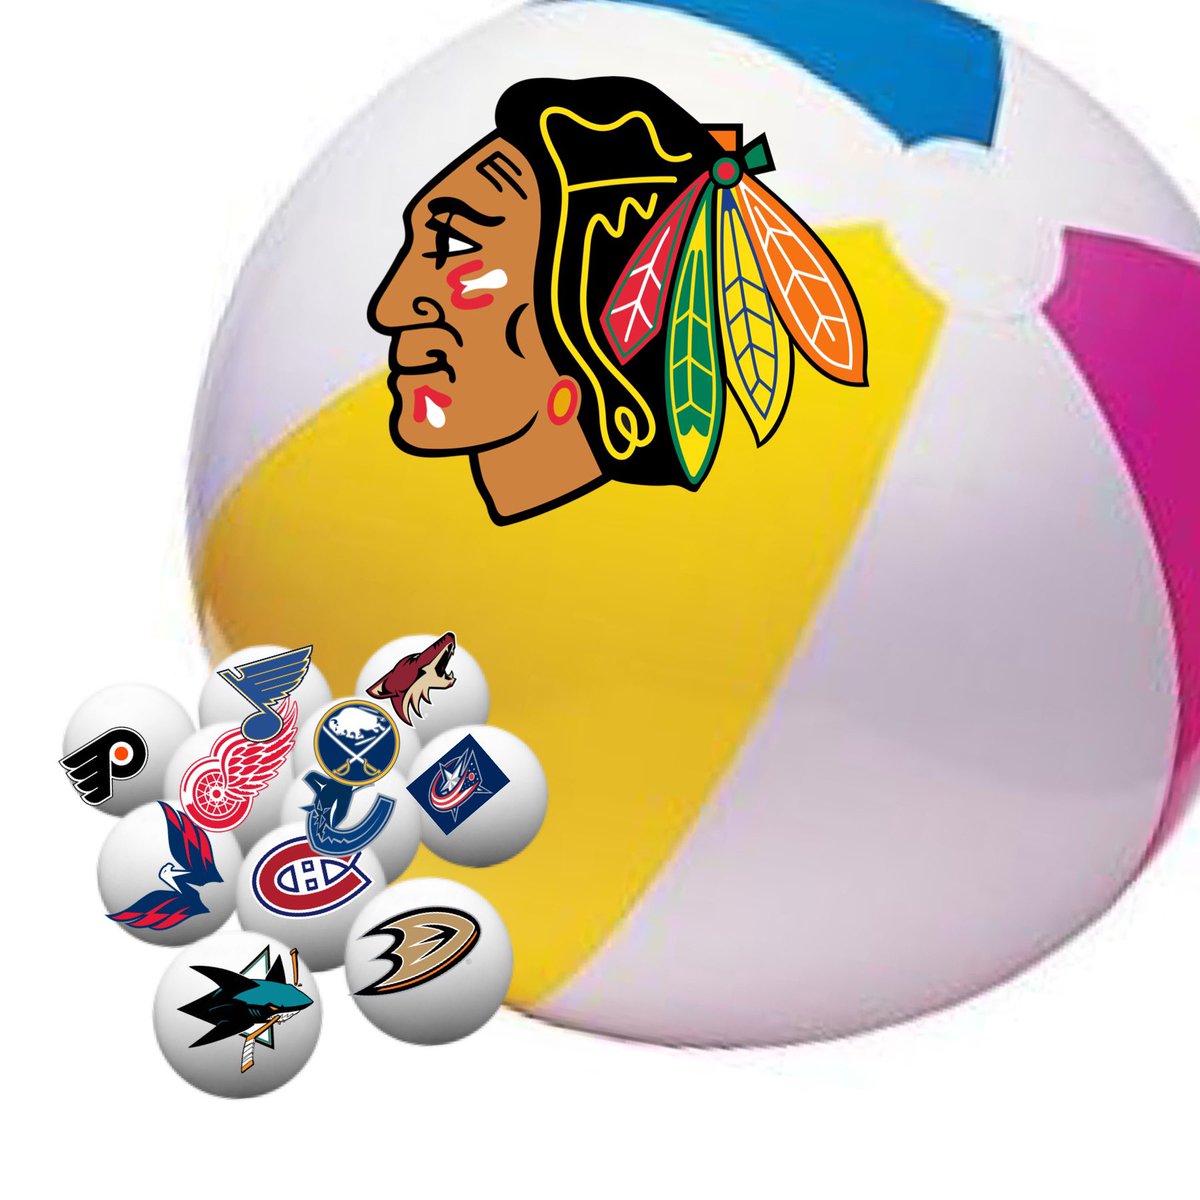 So that’s how they did it!! #NHLdraftlottery #Blackhawks